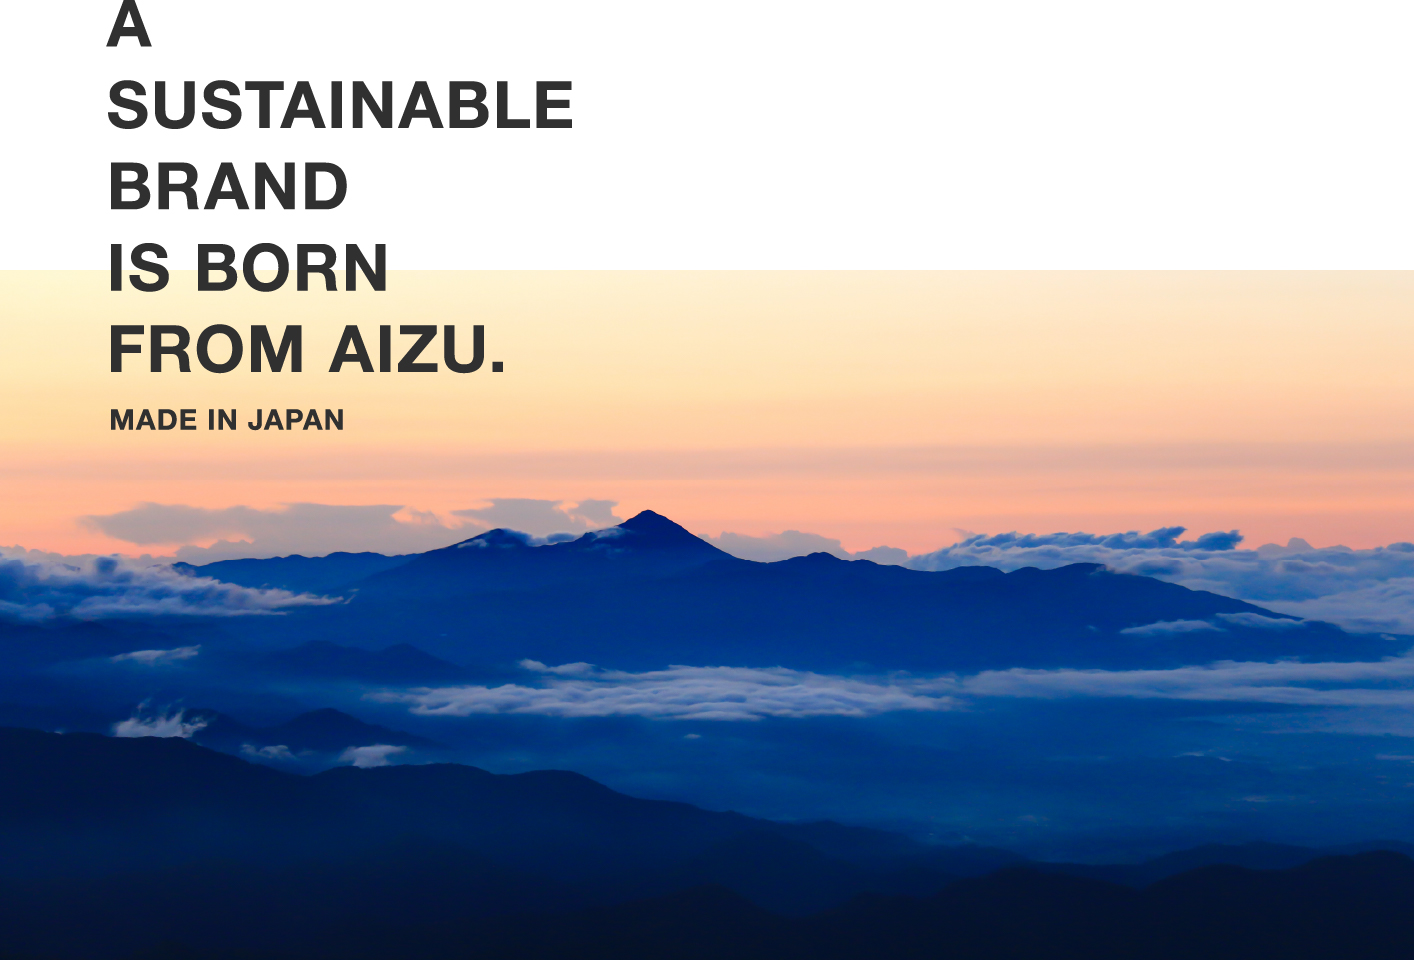 A SUSTAINABLE BRAND IS BORN FROM AIZU MADE IN JAPAN